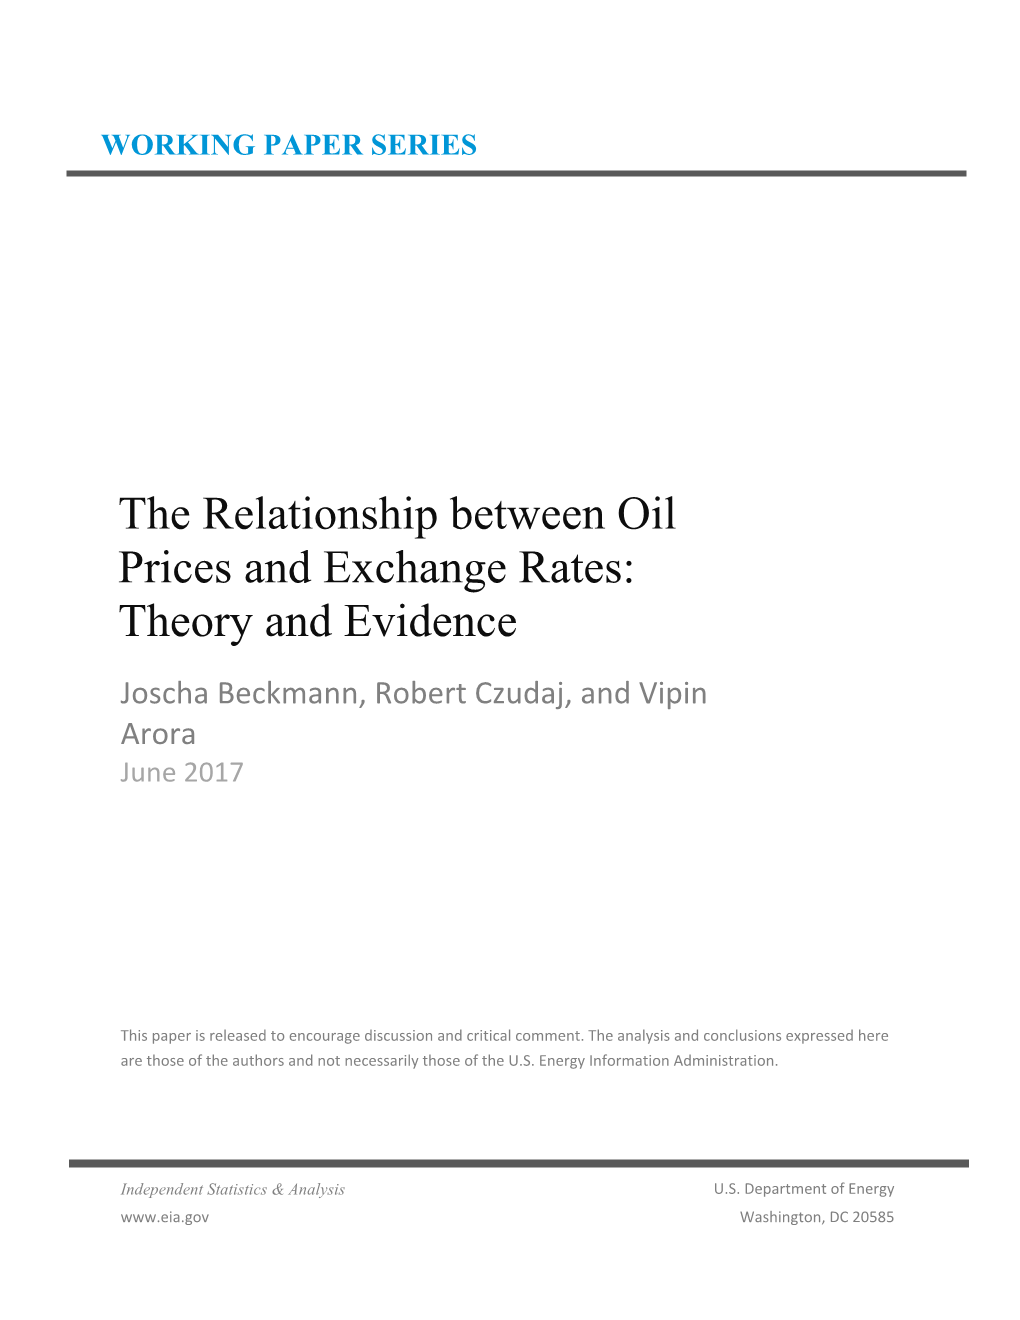 The Relationship Between Oil Prices and Exchange Rates: Theory and Evidence Joscha Beckmann, Robert Czudaj, and Vipin Arora June 2017